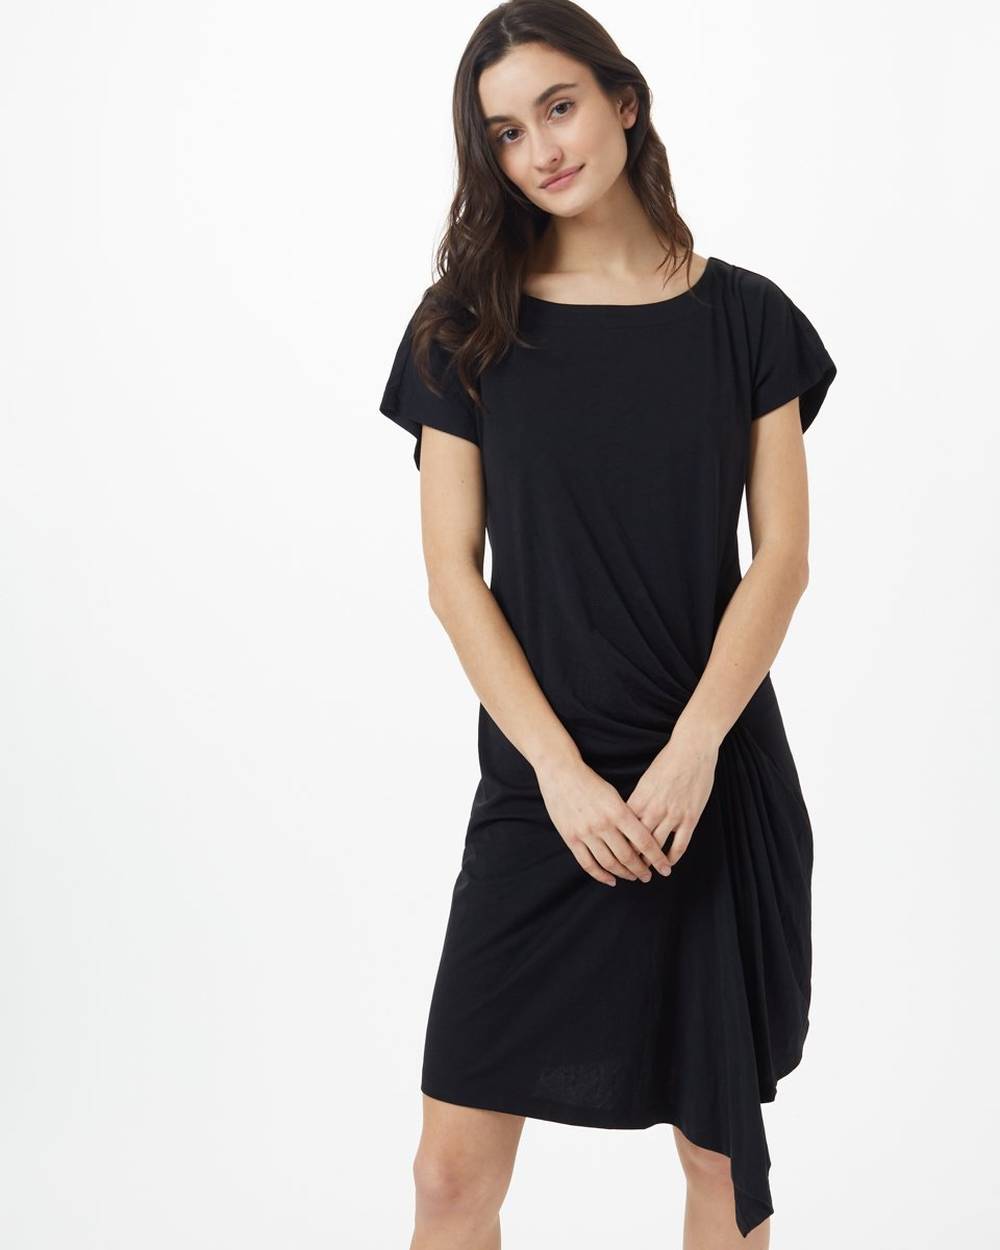 20 Best Affordable, Vegan, Sustainable Clothing Brands